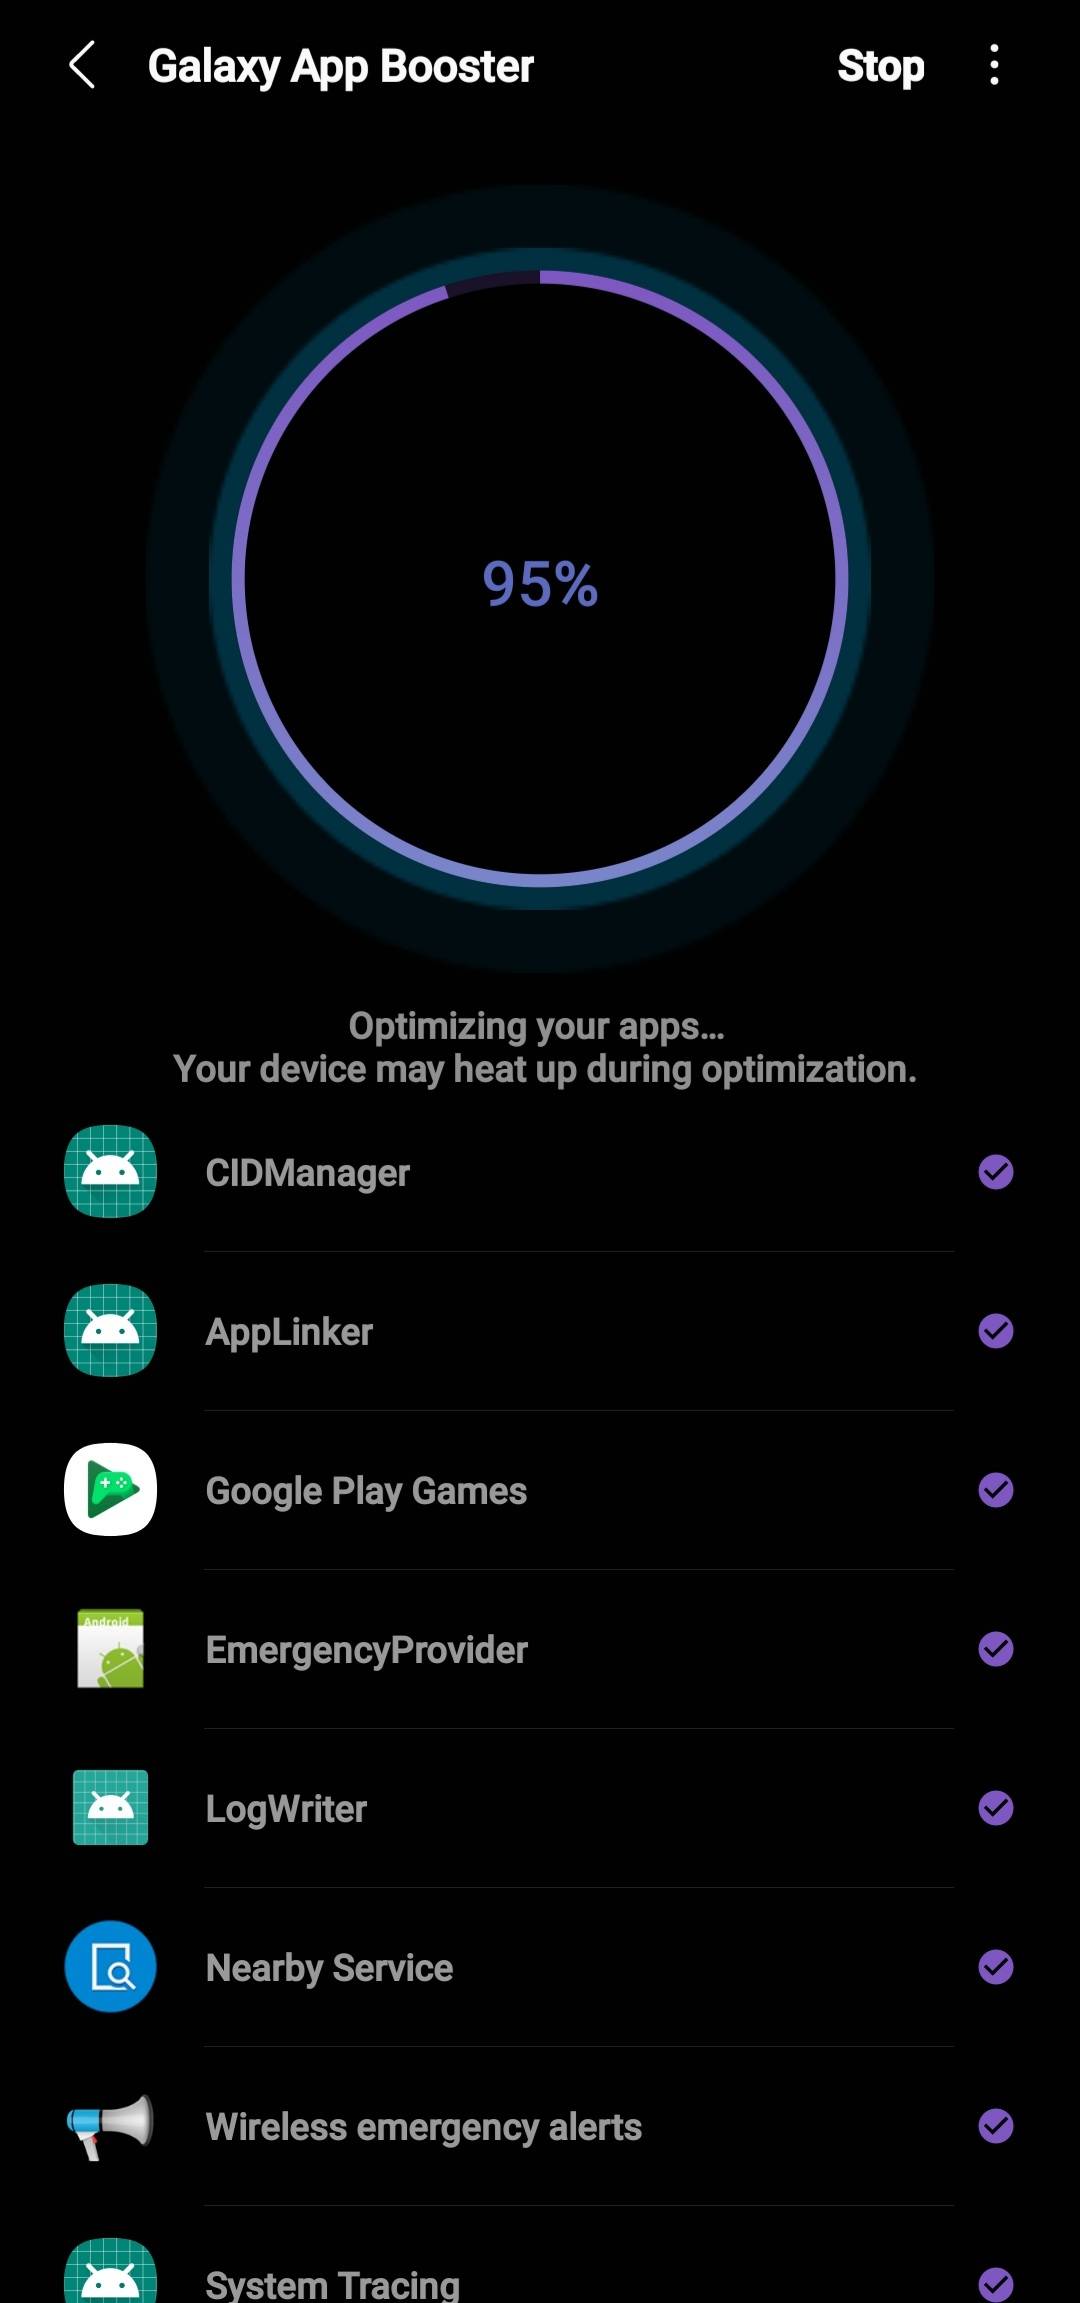 About Galaxy app booster - Samsung Members